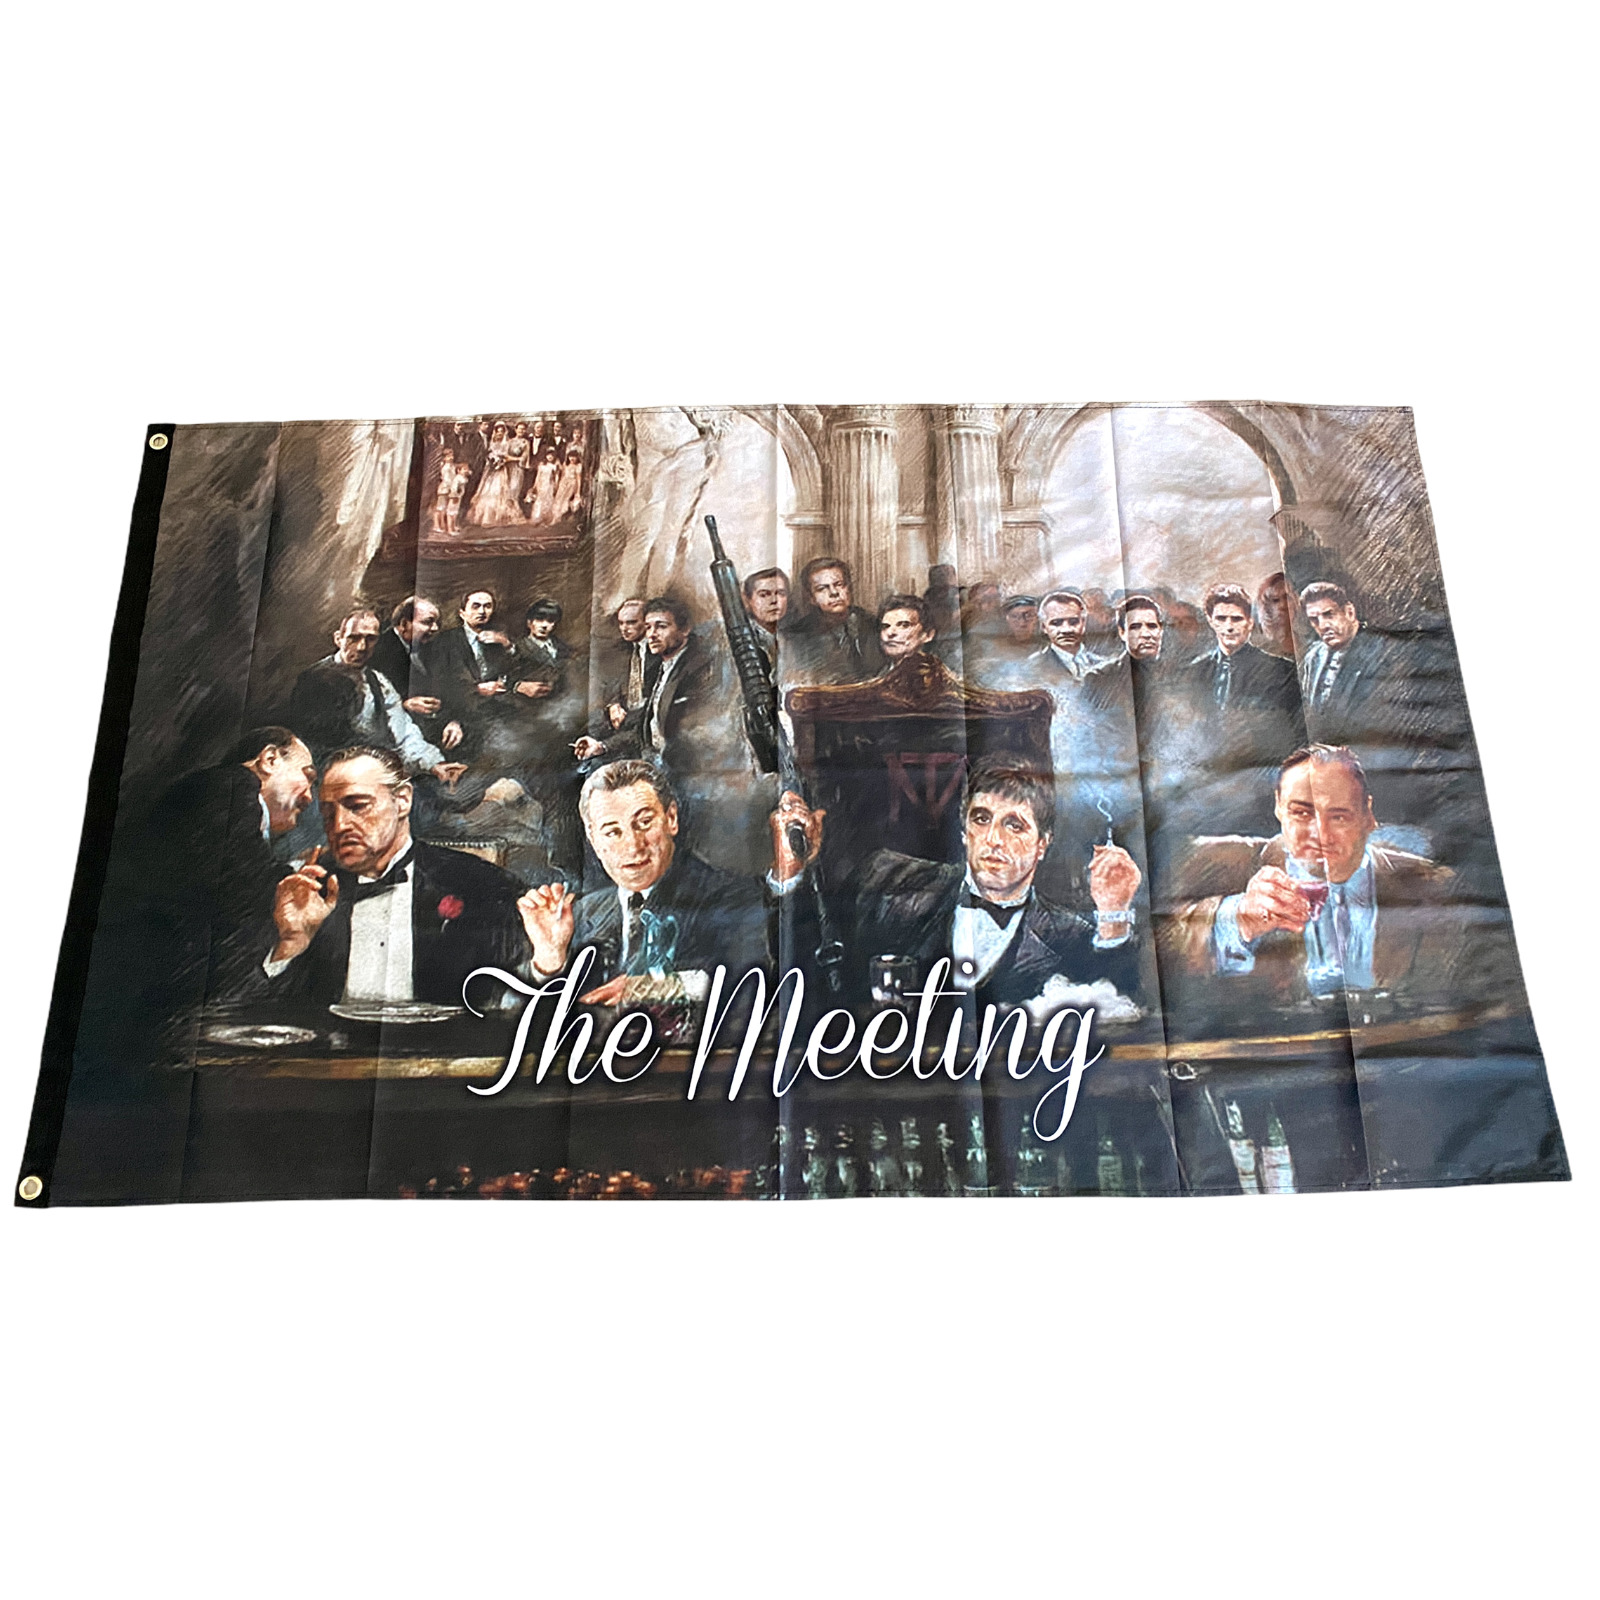 The Meeting 3ftx5ft flag banner limited edition scarface godfather good fellas